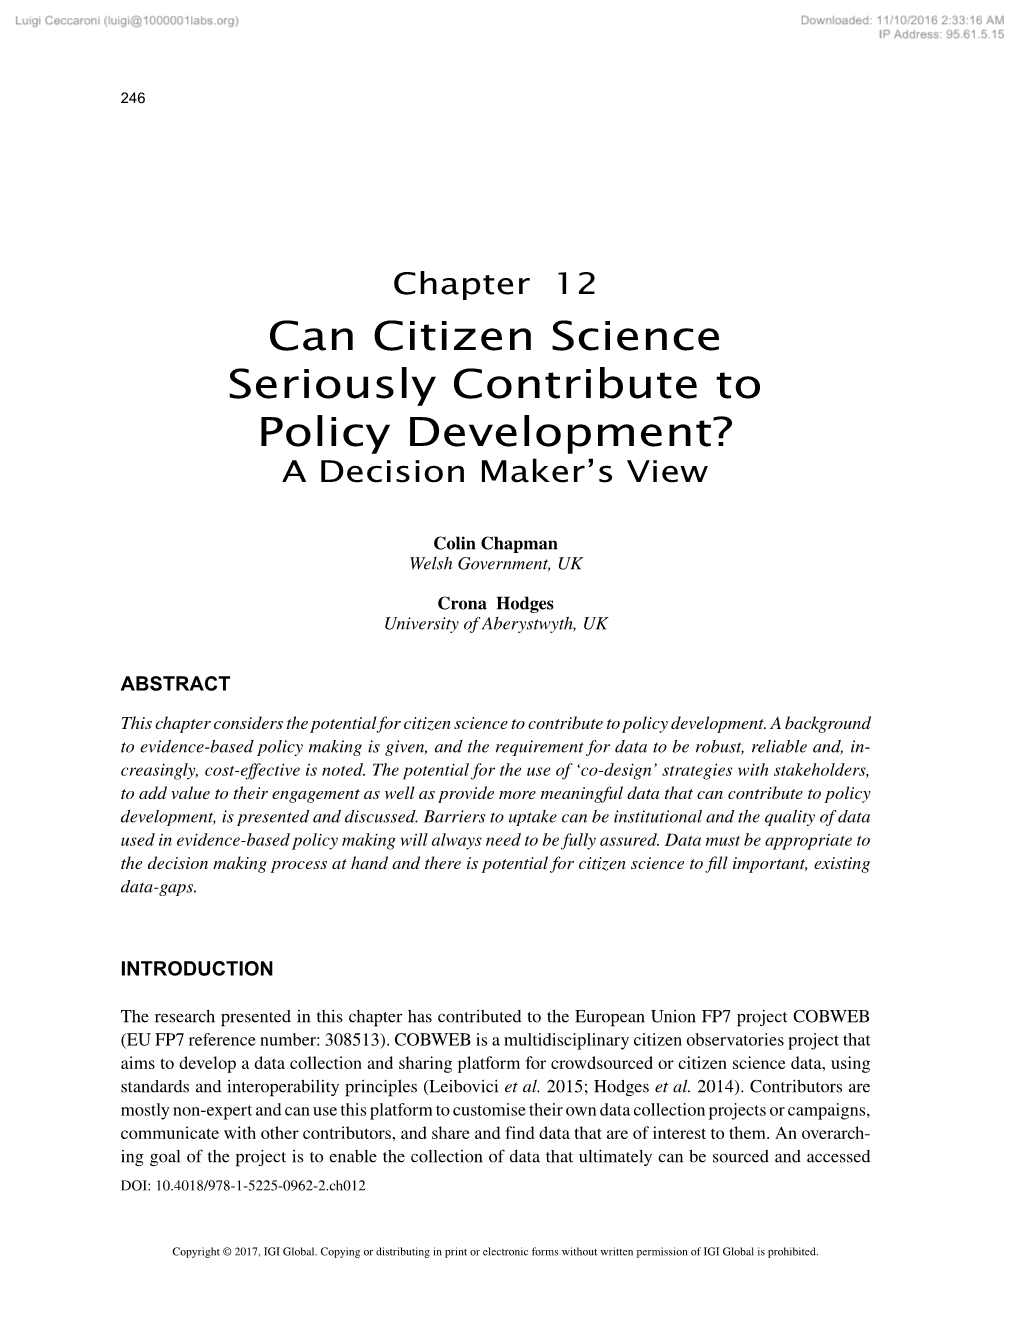 Can Citizen Science Seriously Contribute to Policy Development? a Decision Maker’S View